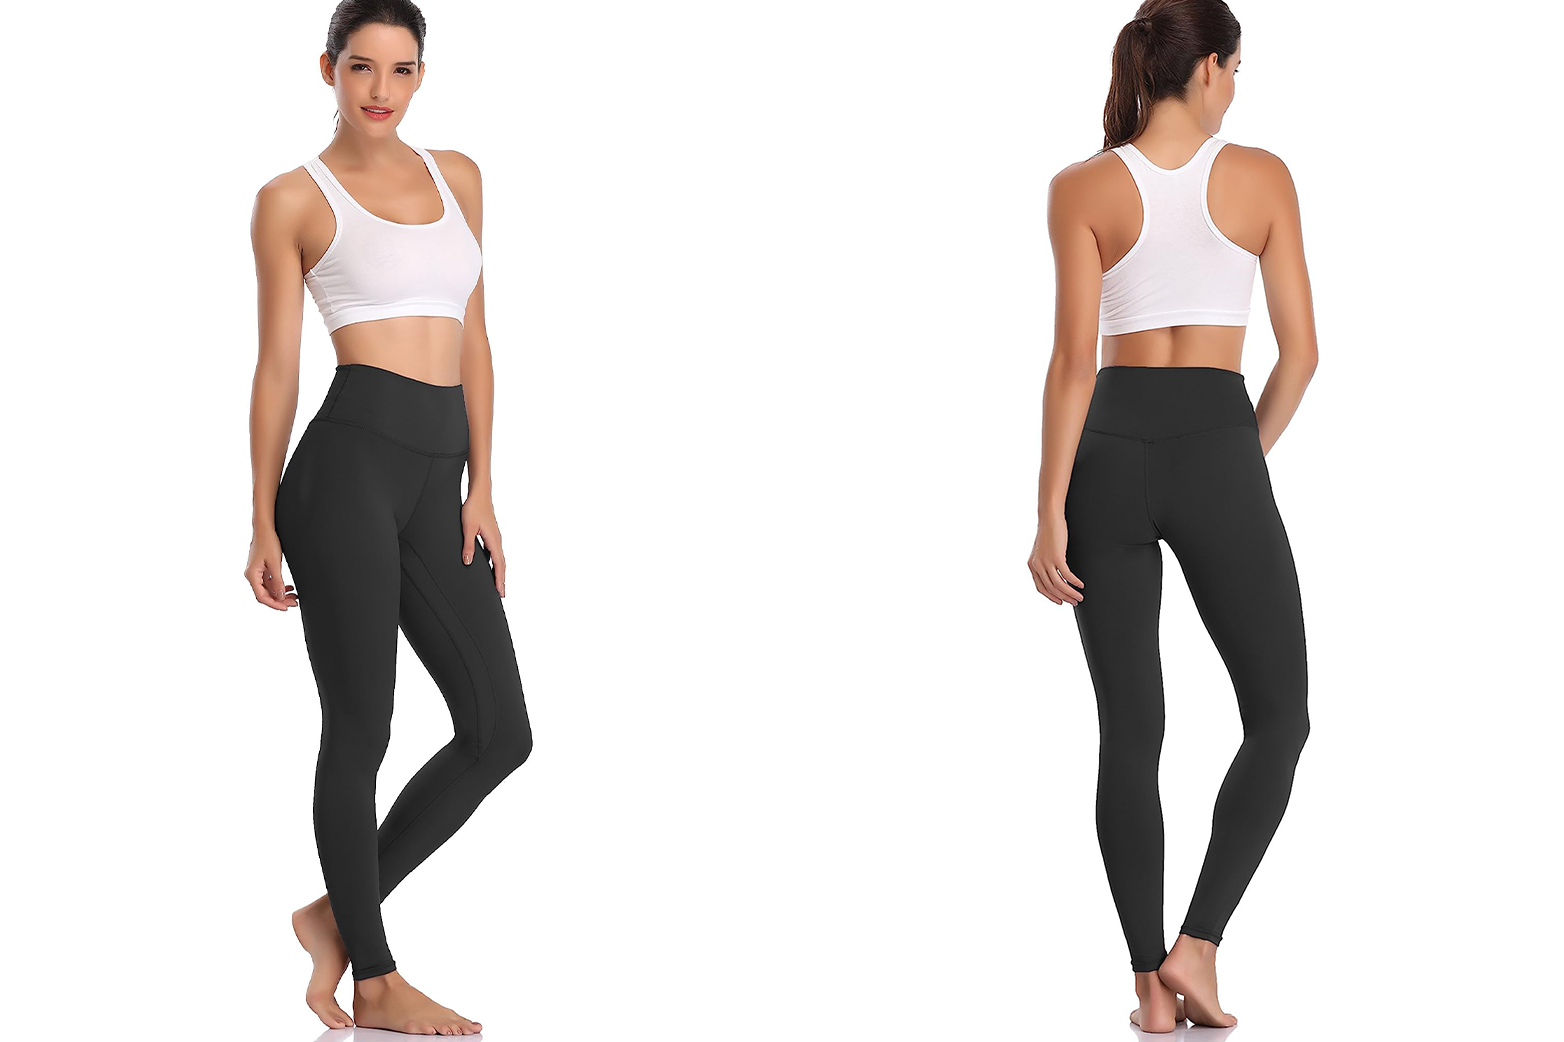 Female in white top modeling Colorfulkoala Women's Buttery Soft High-Waisted Yoga Pants in black front and back.